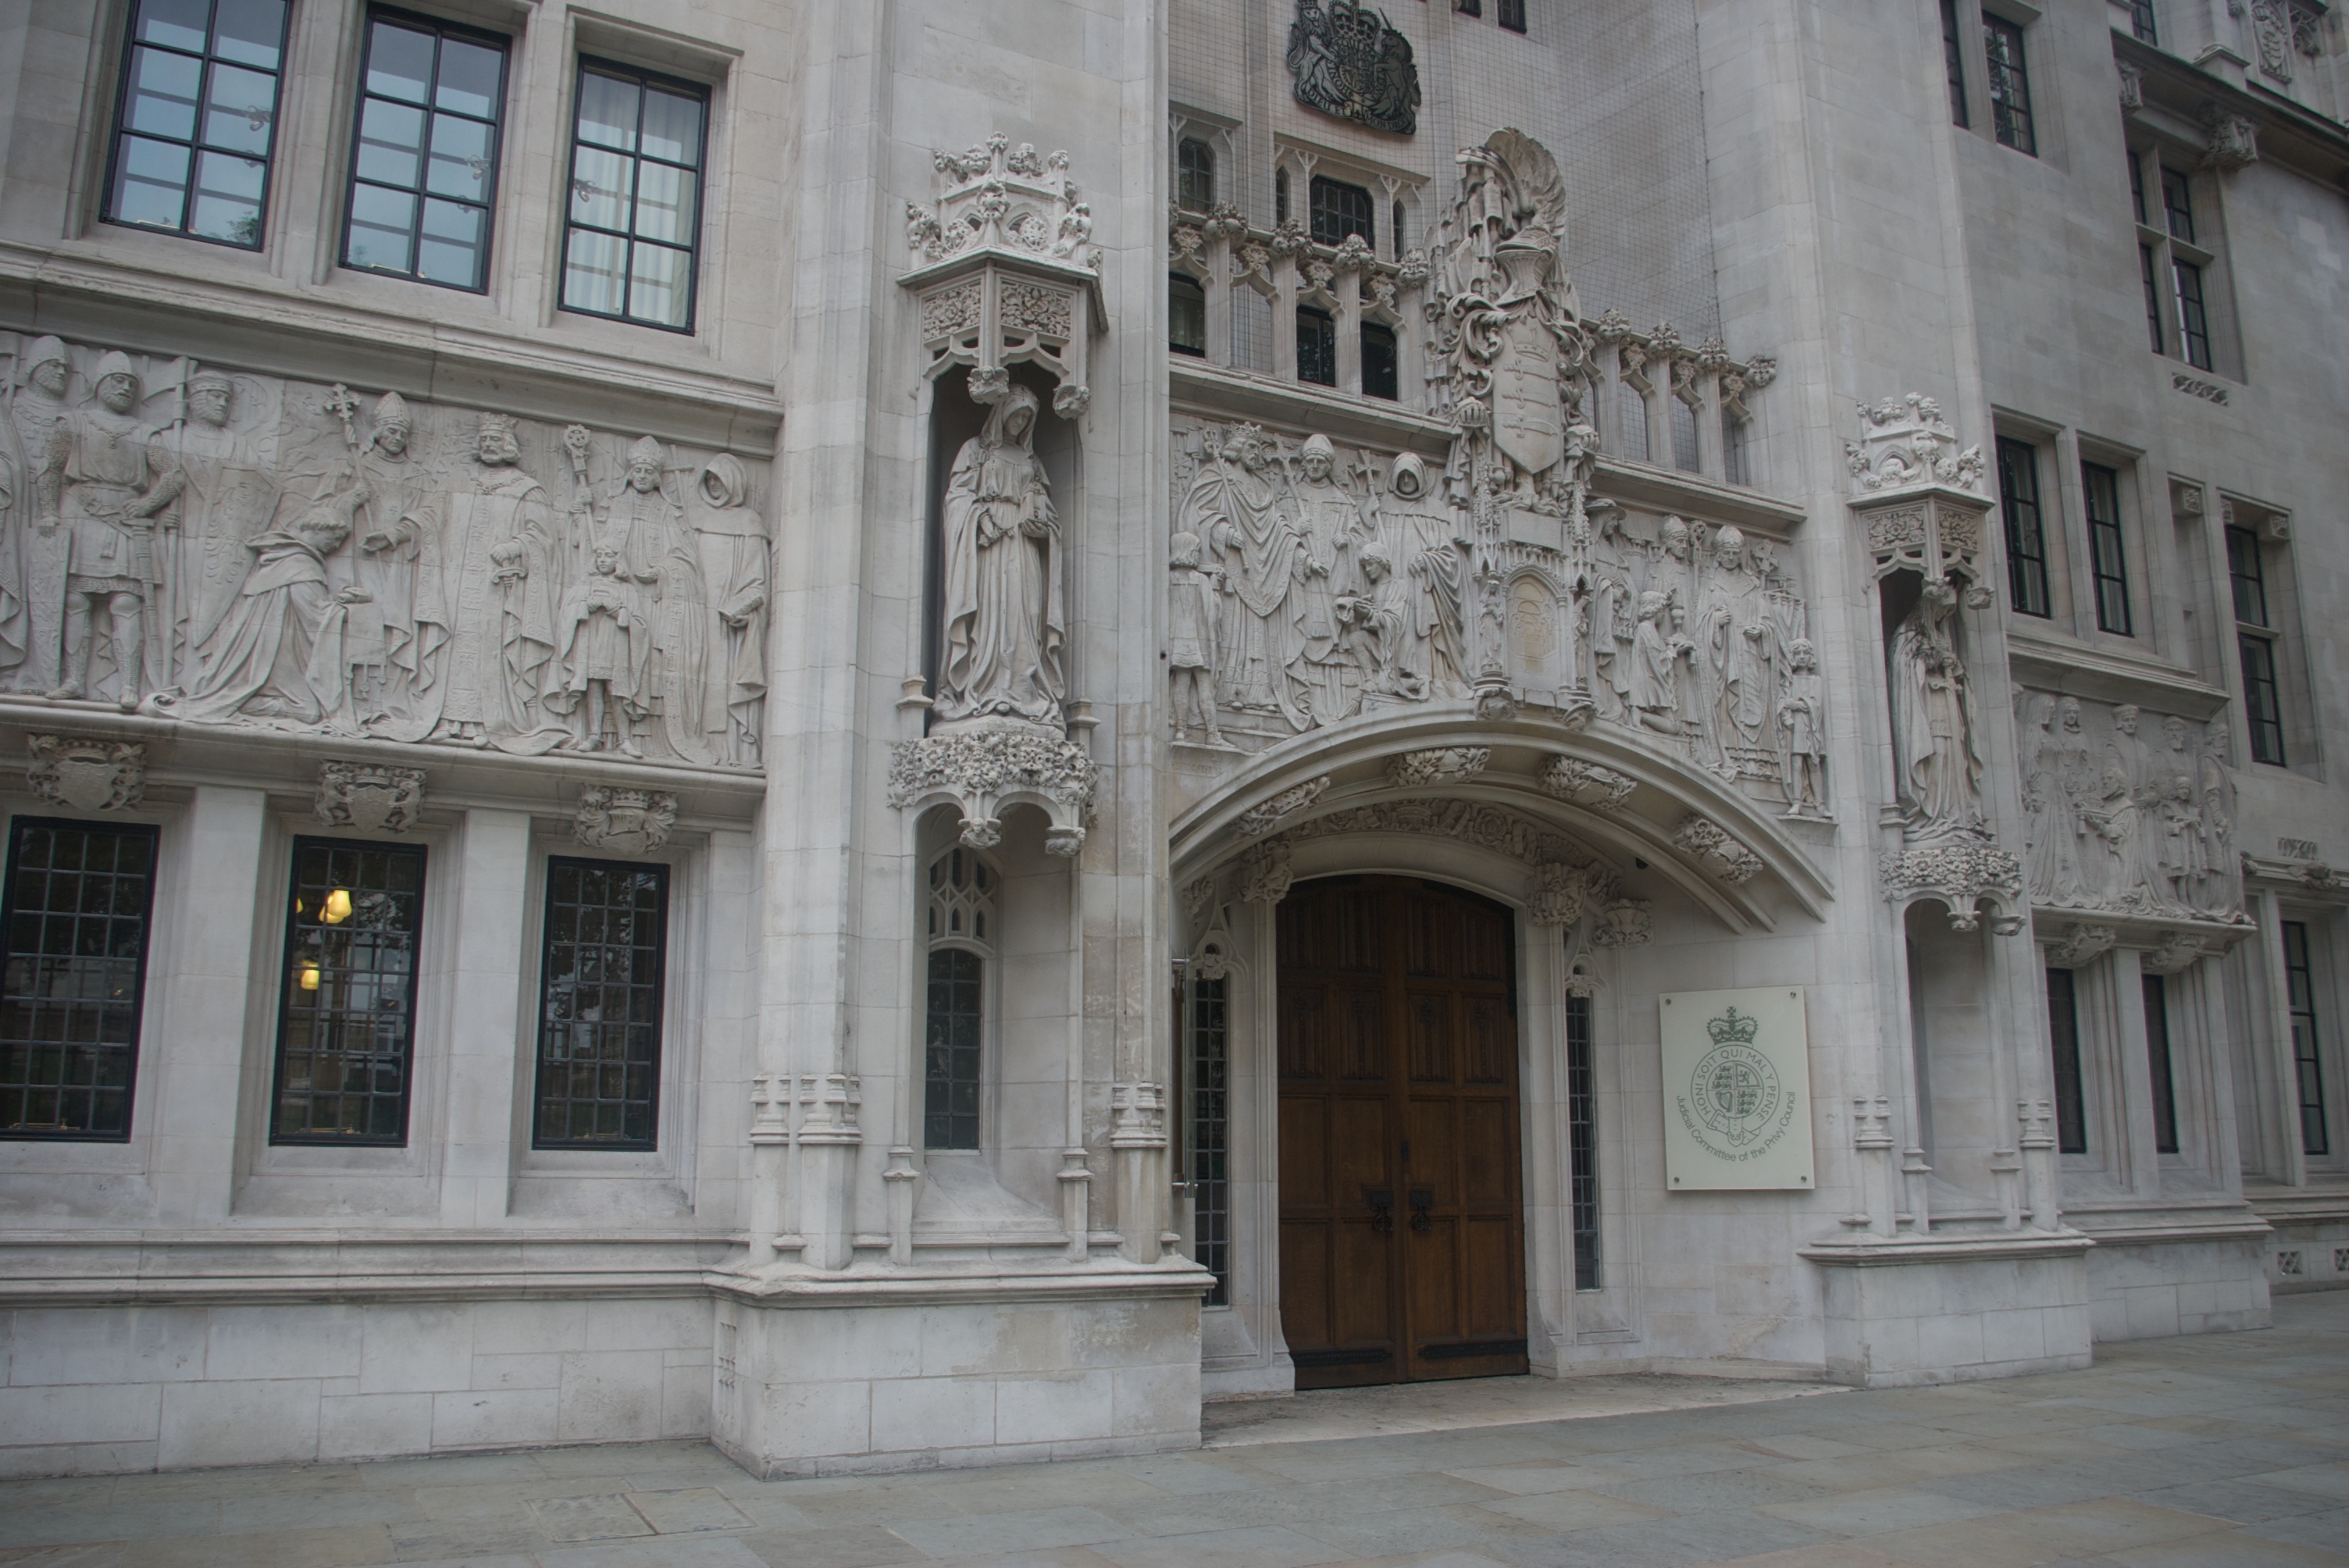 UK Supreme Court rules diplomatic immunity cannot be used to block modern slavery lawsuits